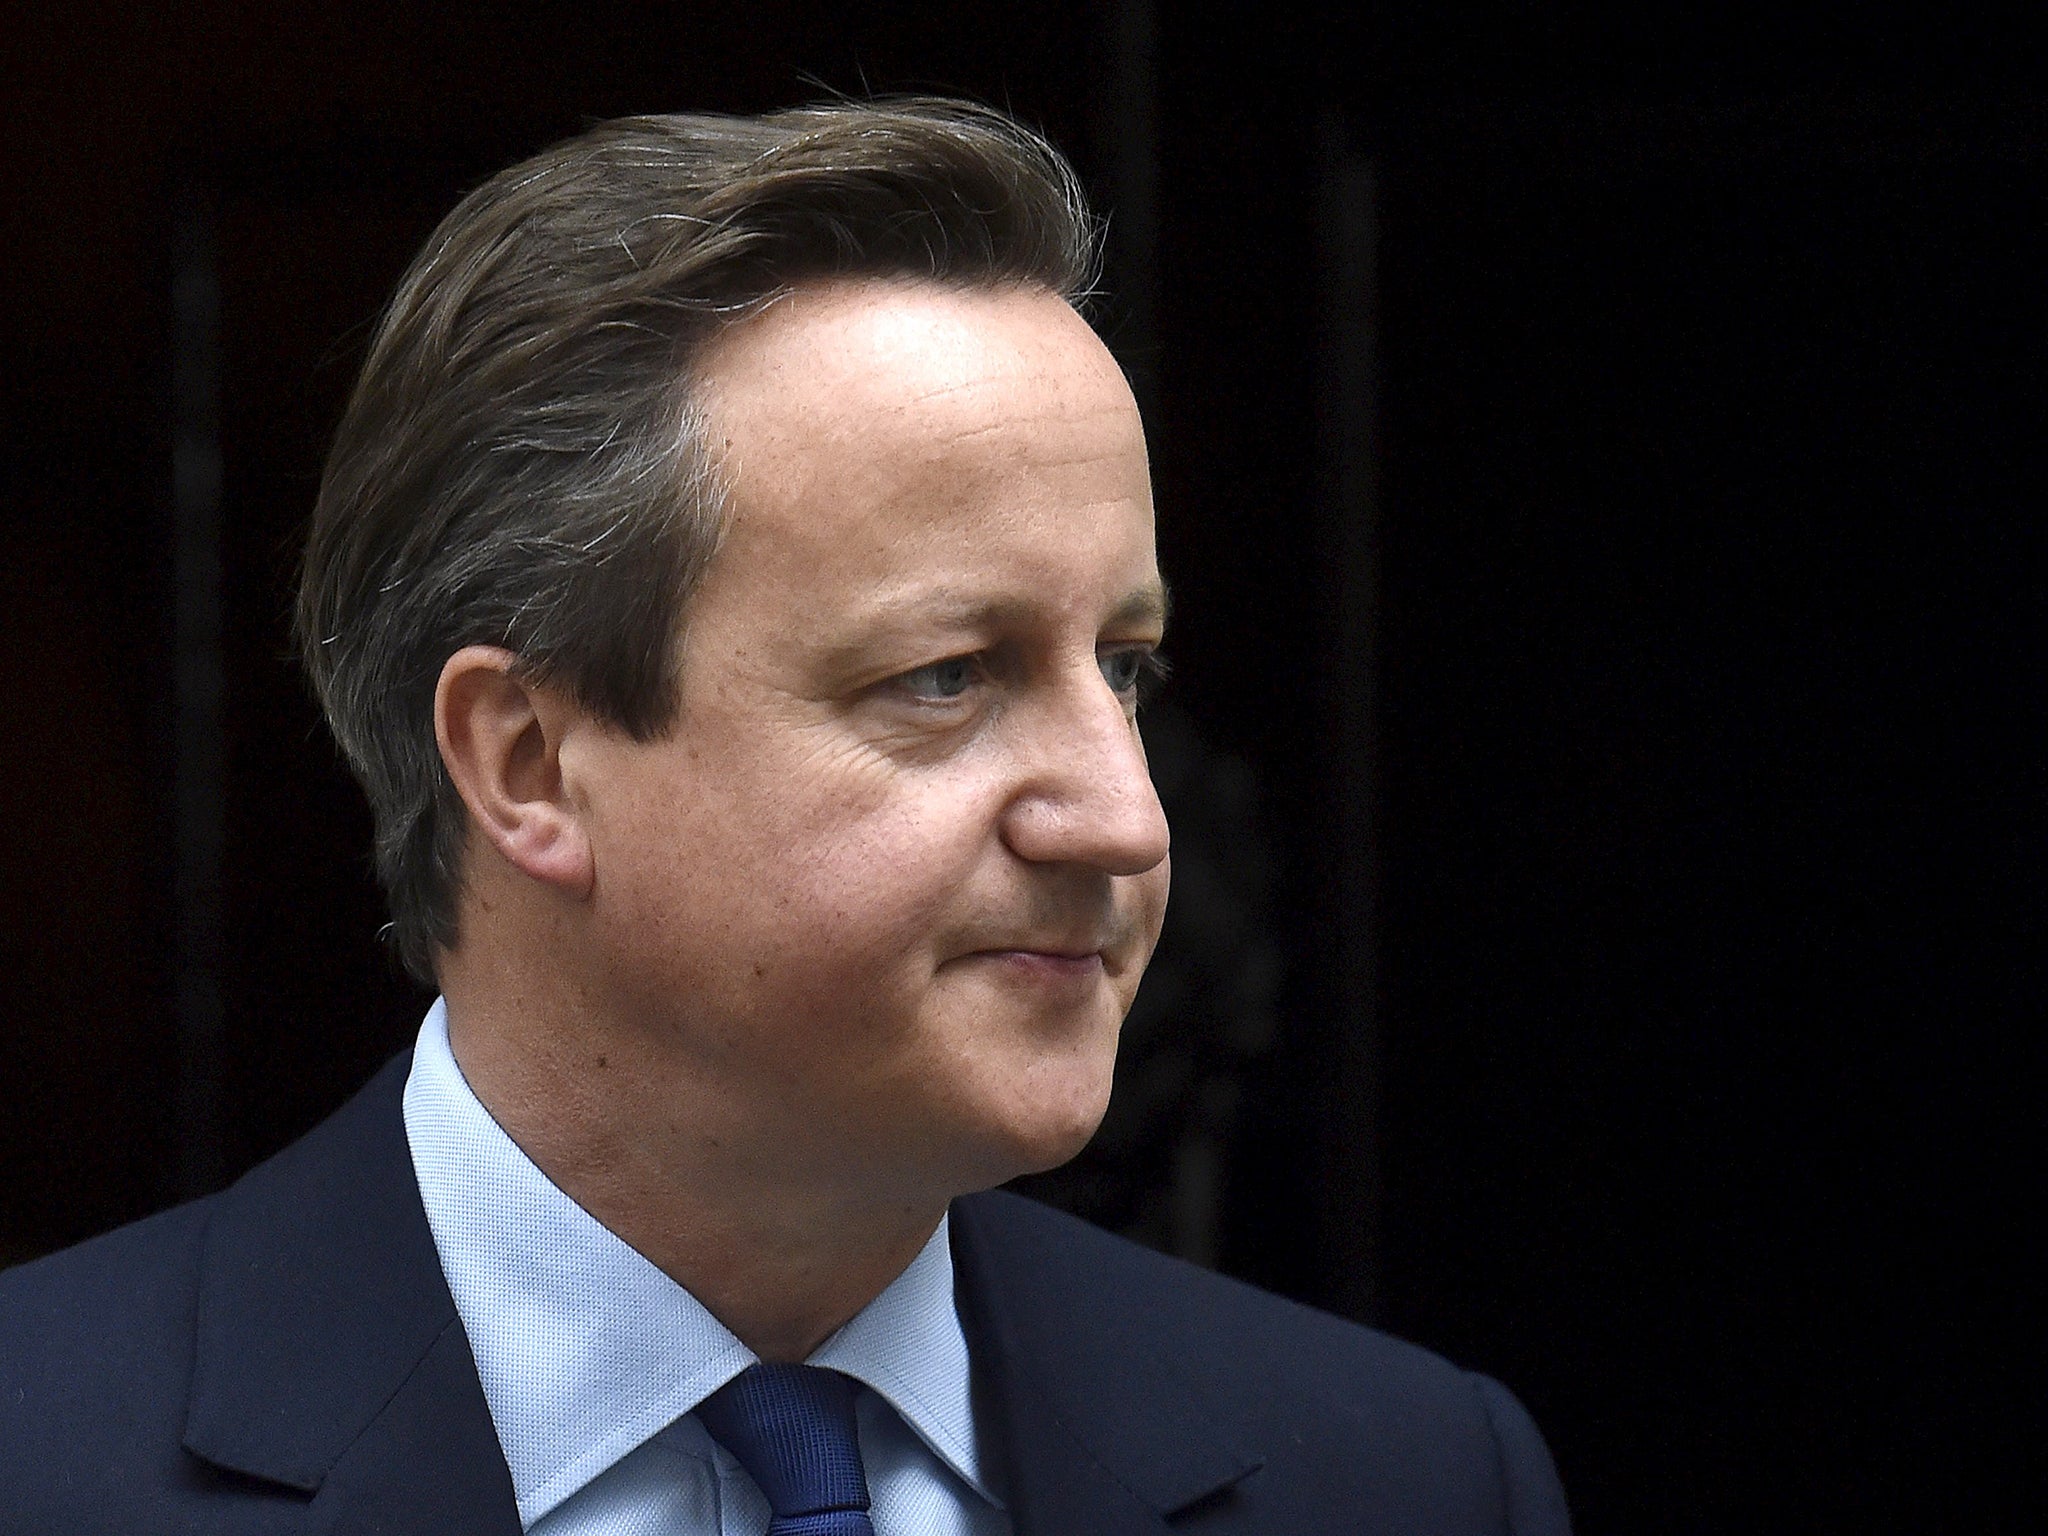 David Cameron urged people to work for 'lasting peace' in the Middle East on Yom Kippur